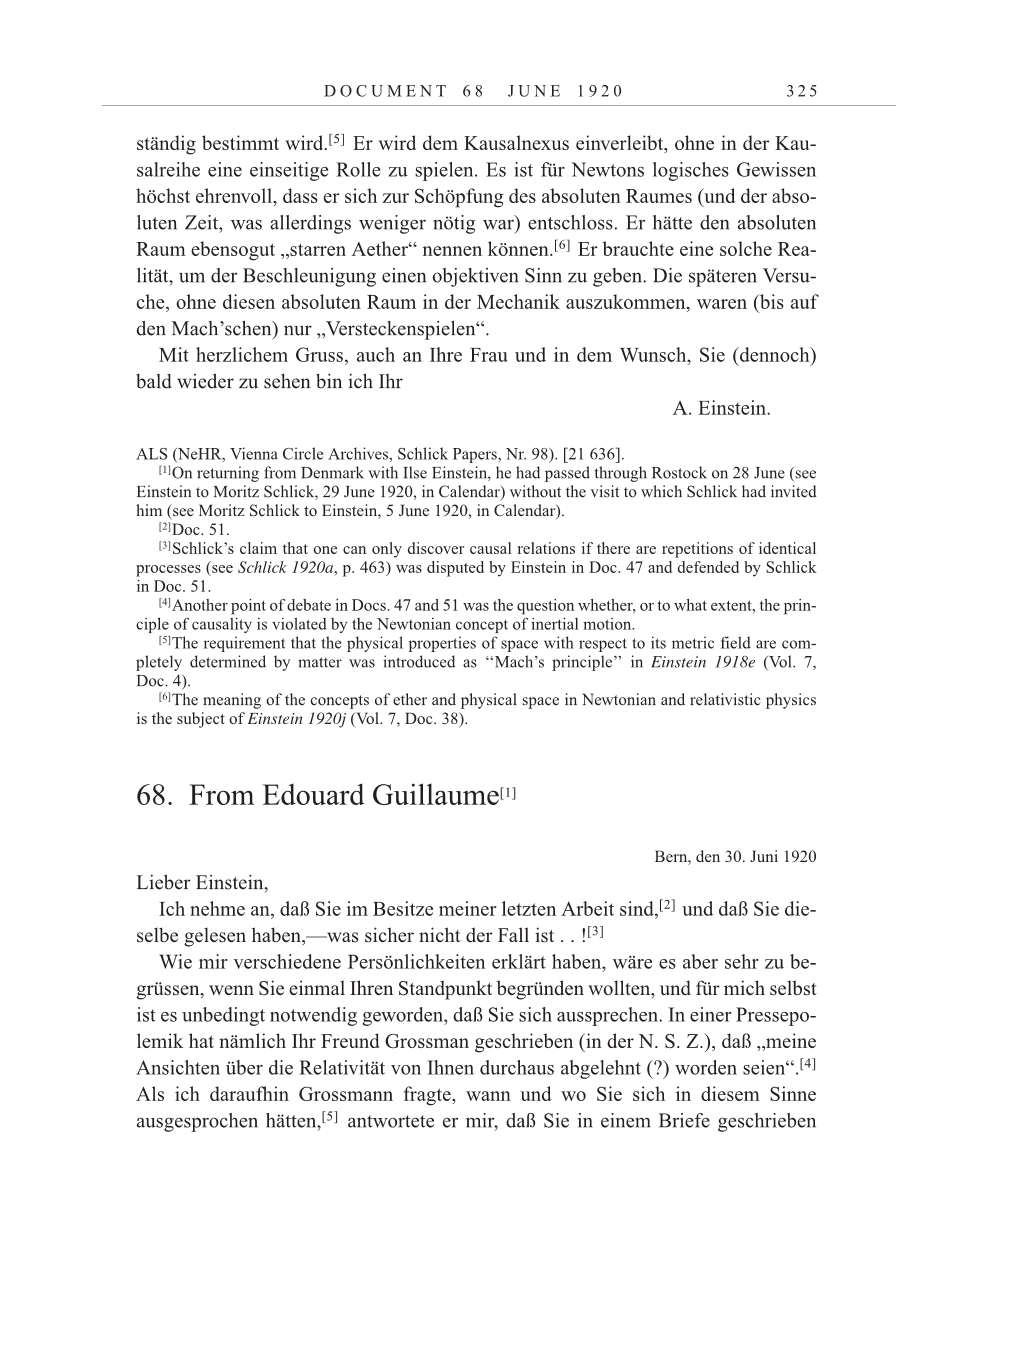 Volume 10: The Berlin Years: Correspondence May-December 1920 / Supplementary Correspondence 1909-1920 page 325